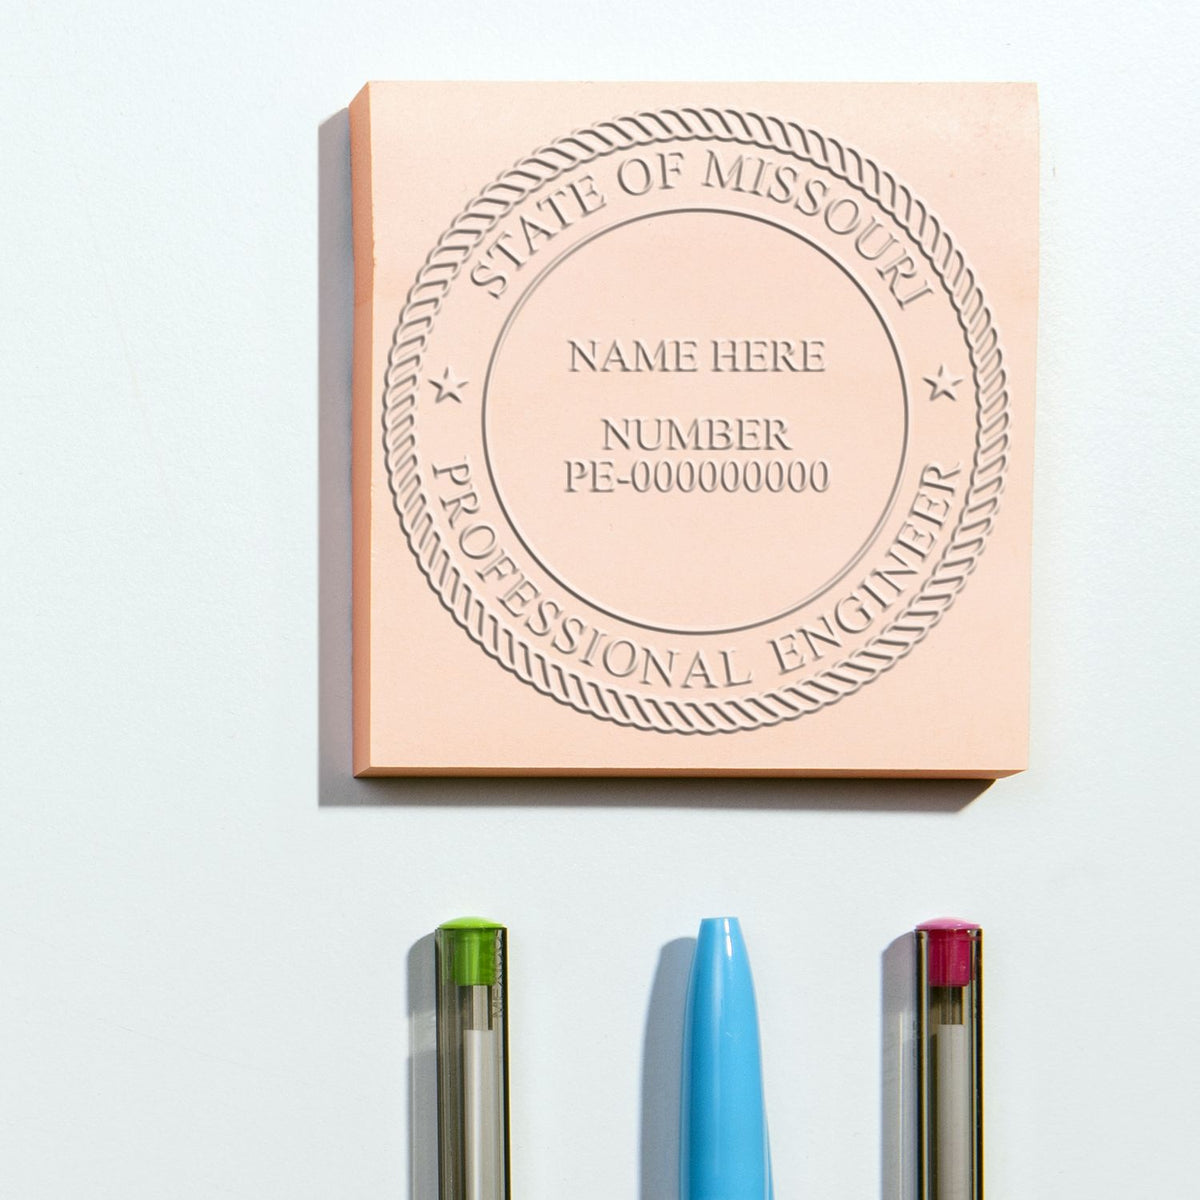 A stamped impression of the Missouri Engineer Desk Seal in this stylish lifestyle photo, setting the tone for a unique and personalized product.